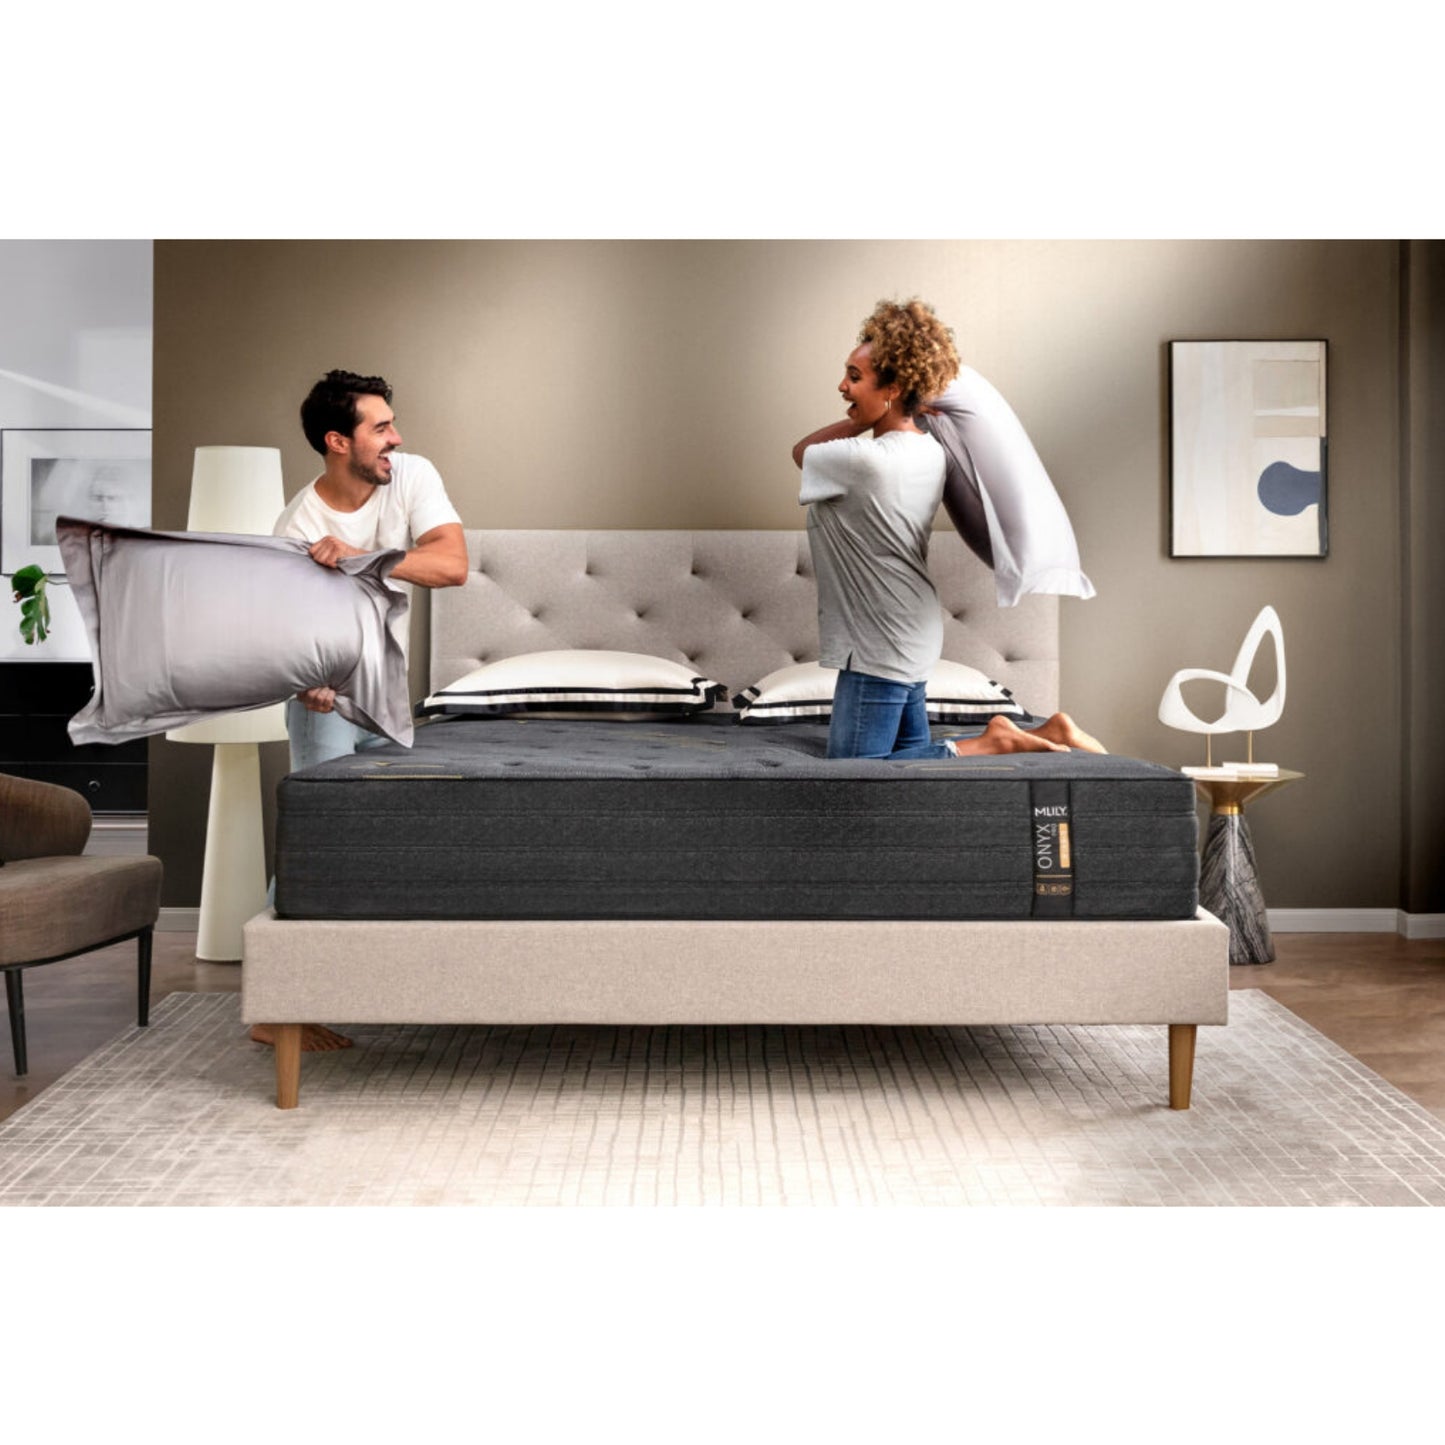 ONYX Pro 13" Hybrid Mattress With Copper Infused Memory Foam Inside Of A Bedroom With A Man And Woman Pillow Fighting